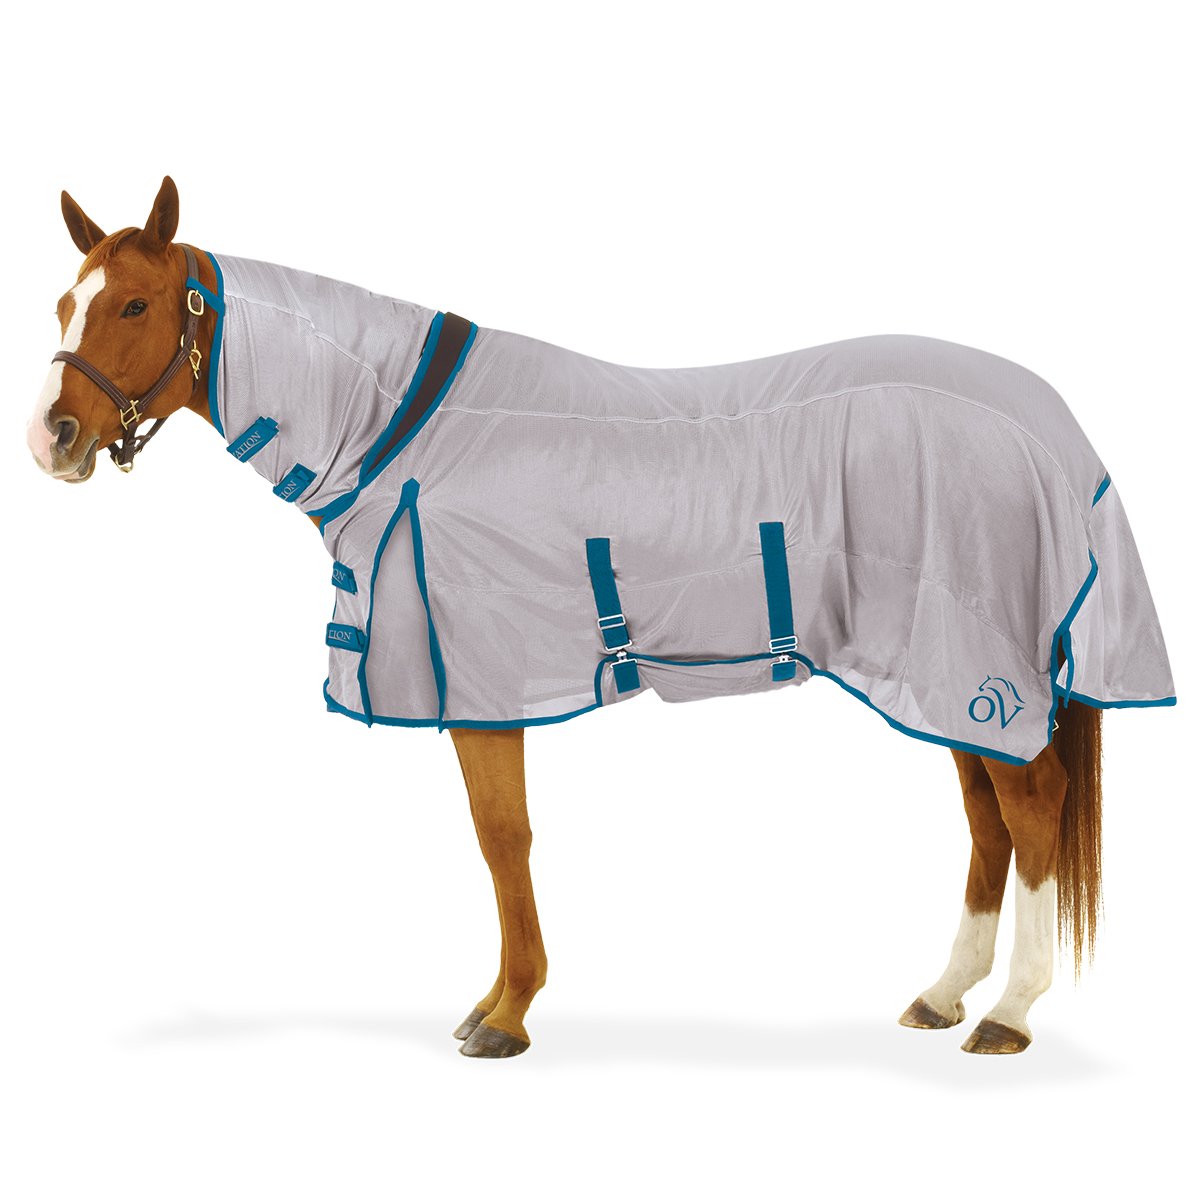 Ovation Super Fly Sheet With Attached Neck and Belly Cover - Equine Exchange Tack Shop